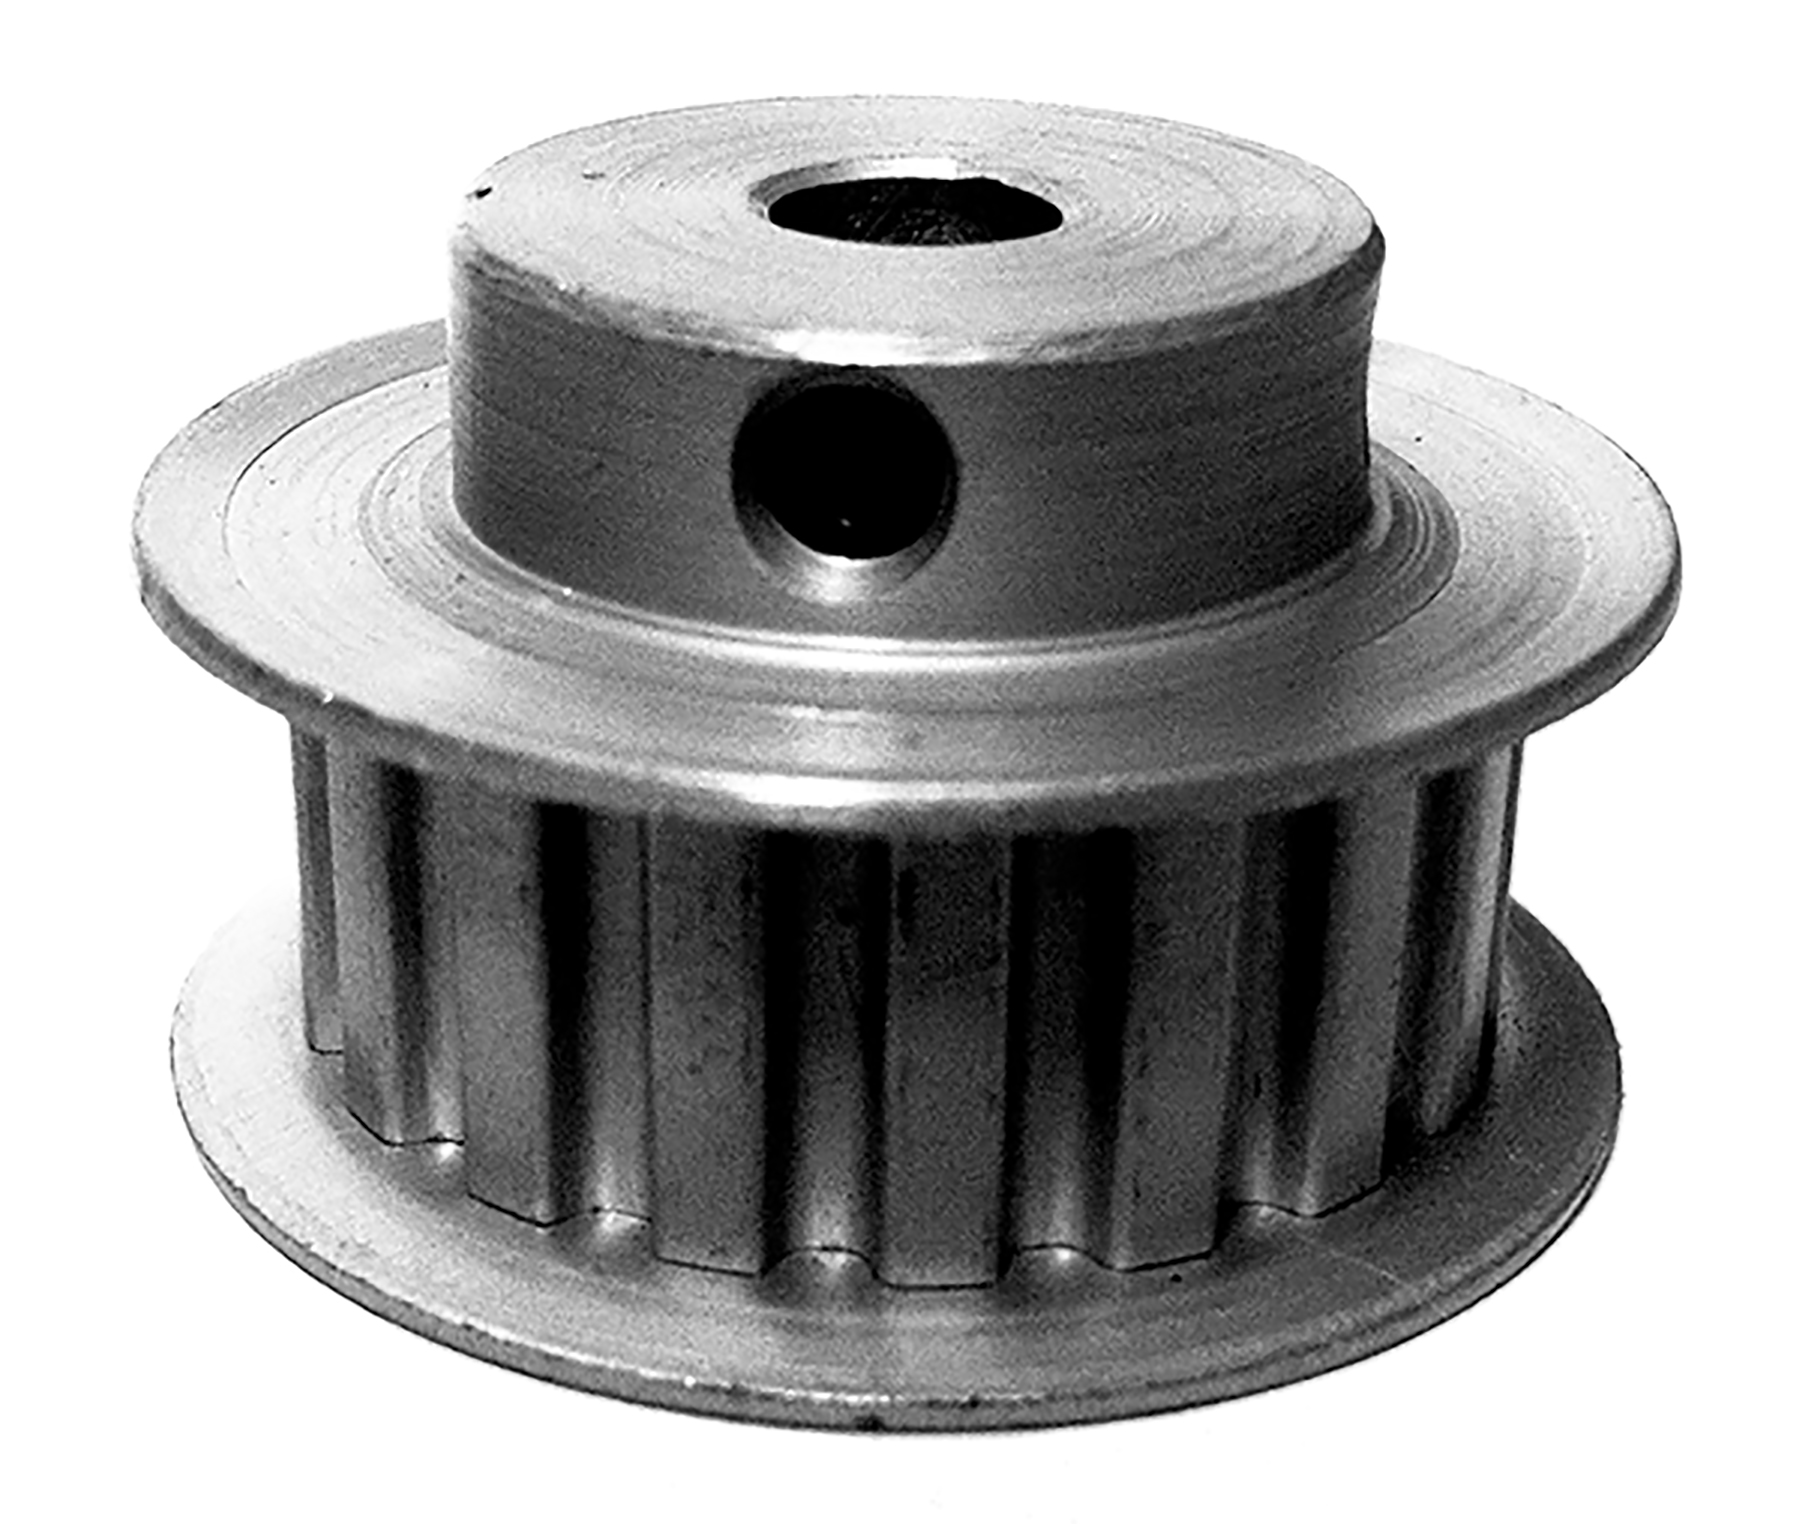 25XL037-6FA5 - Aluminum Imperial Pitch Pulleys